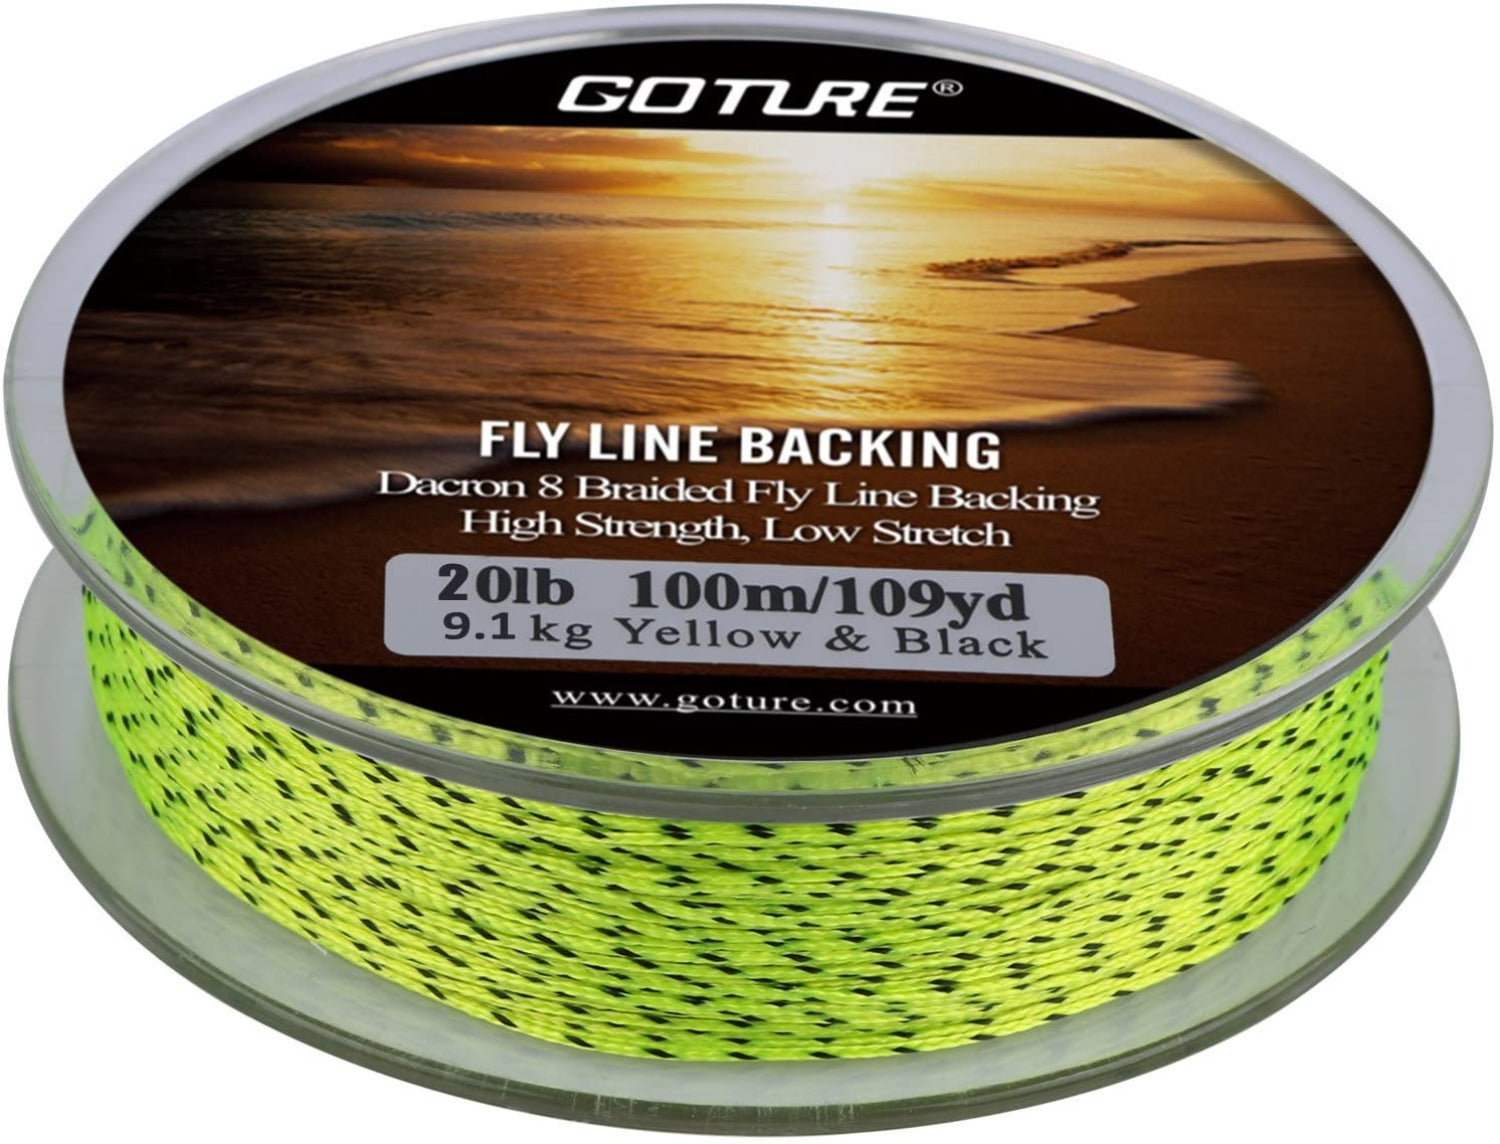  Goture Fly Line Fishing Line Weight Forward Floating Fly Line  Double Micro Welded Loops Freshwater Saltwater Beginner Expert General WF2  3 4 5 6 7 8 9 10WT Olive Orange Yellow